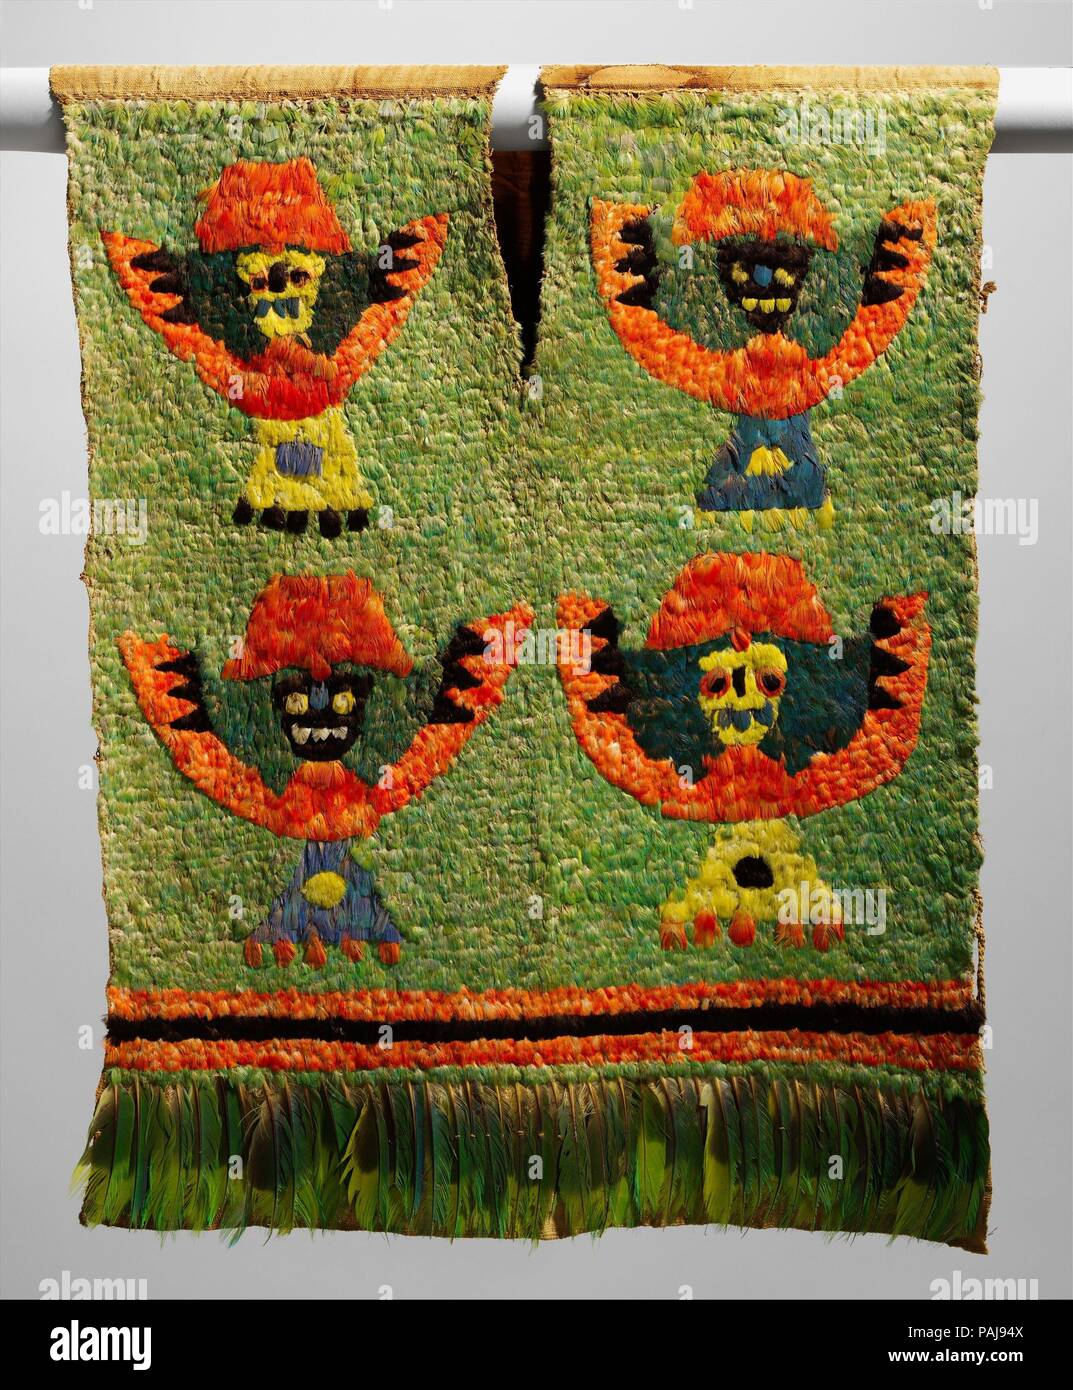 Feathered Tabard. Culture: Ica (?). Dimensions: H. 30 × W. 25 in. (76.2 × 63.5 cm). Date: 15th-early 17th century.  Feathers were considered luxury materials in ancient Peru. They were used to embellish elite costume for thousands of years. Textiles densely covered with the brilliantly colored feathers of tropical rainforest birds are among the most spectacular works produced by ancient Andean artists. Feathered garments lent the wearer status and prestige and indicated wealth. Far-reaching contacts were necessary to bring the Amazonian bird feathers over the long distances between the eastern Stock Photo